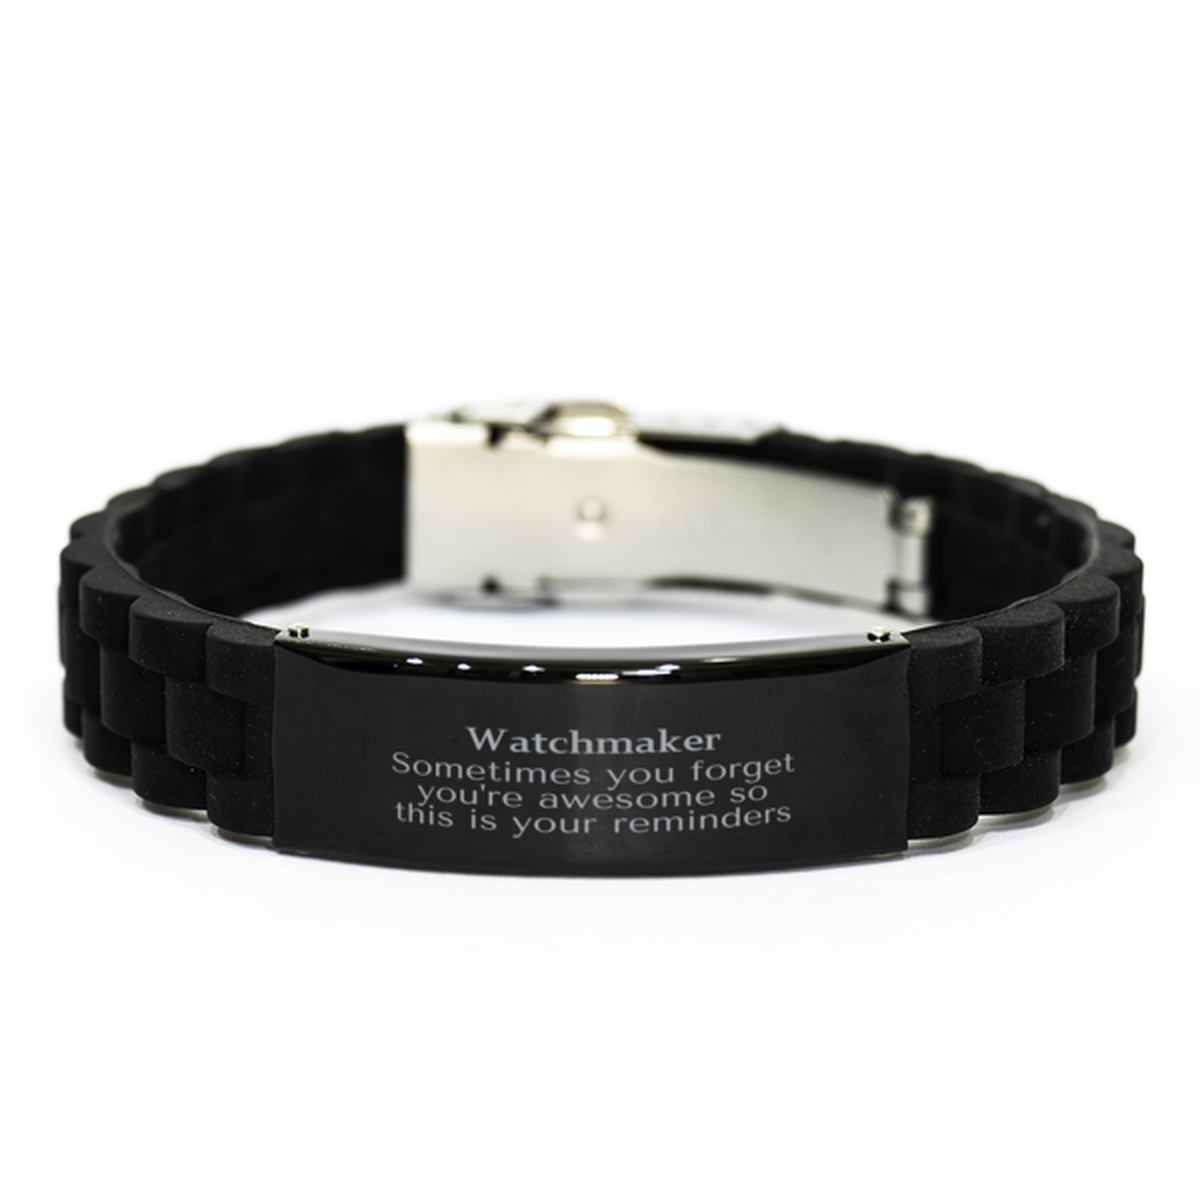 Sentimental Watchmaker Black Glidelock Clasp Bracelet, Watchmaker Sometimes you forget you're awesome so this is your reminders, Graduation Christmas Birthday Gifts for Watchmaker, Men, Women, Coworkers